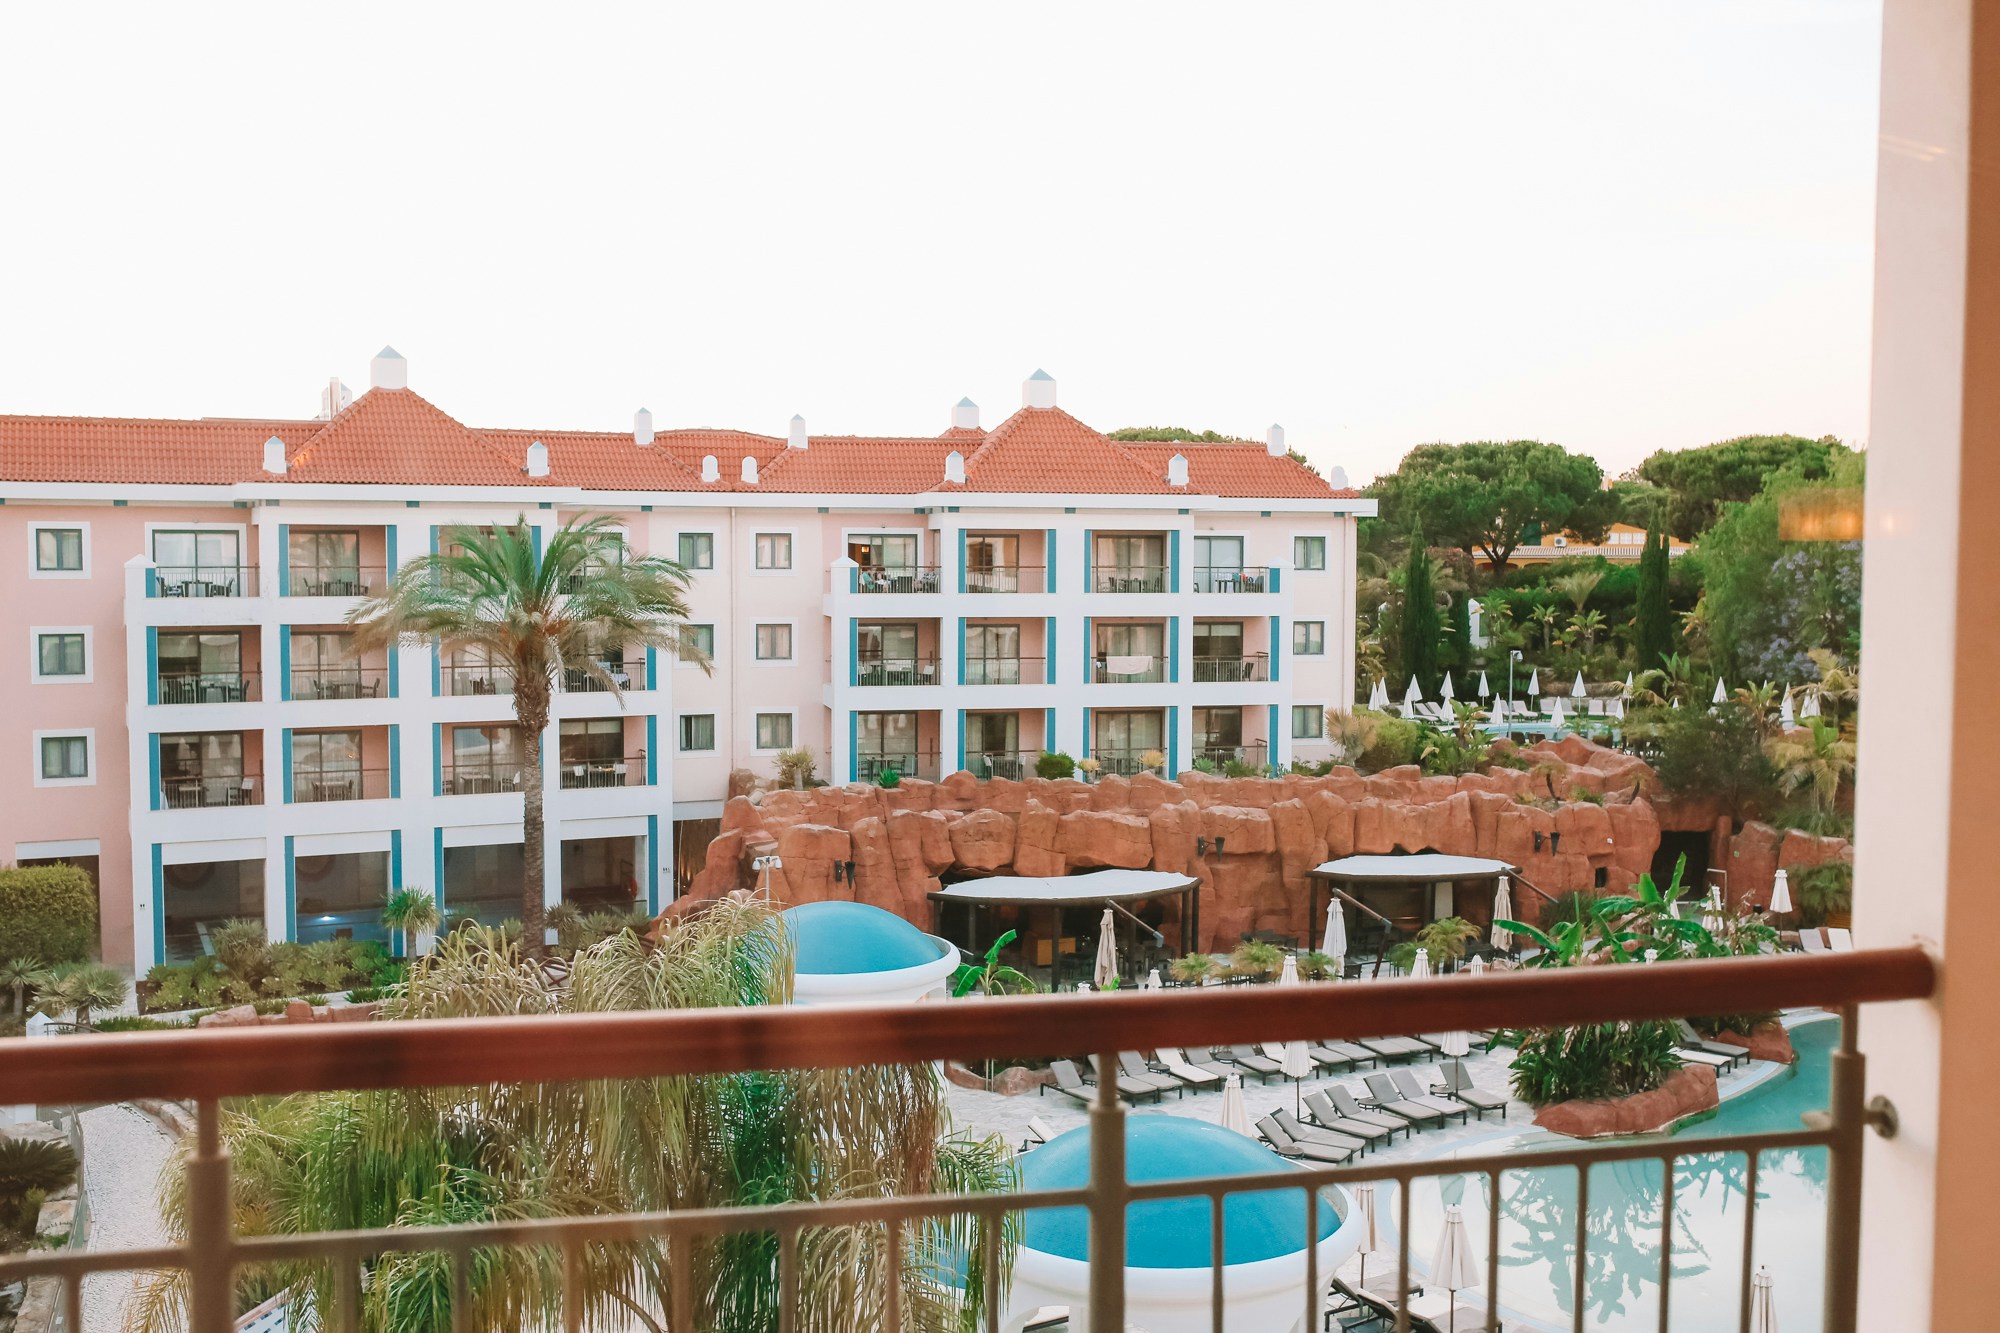 Balcony views from our room at Hilton Vilamoura As Cascatas Golf Resort & Spa